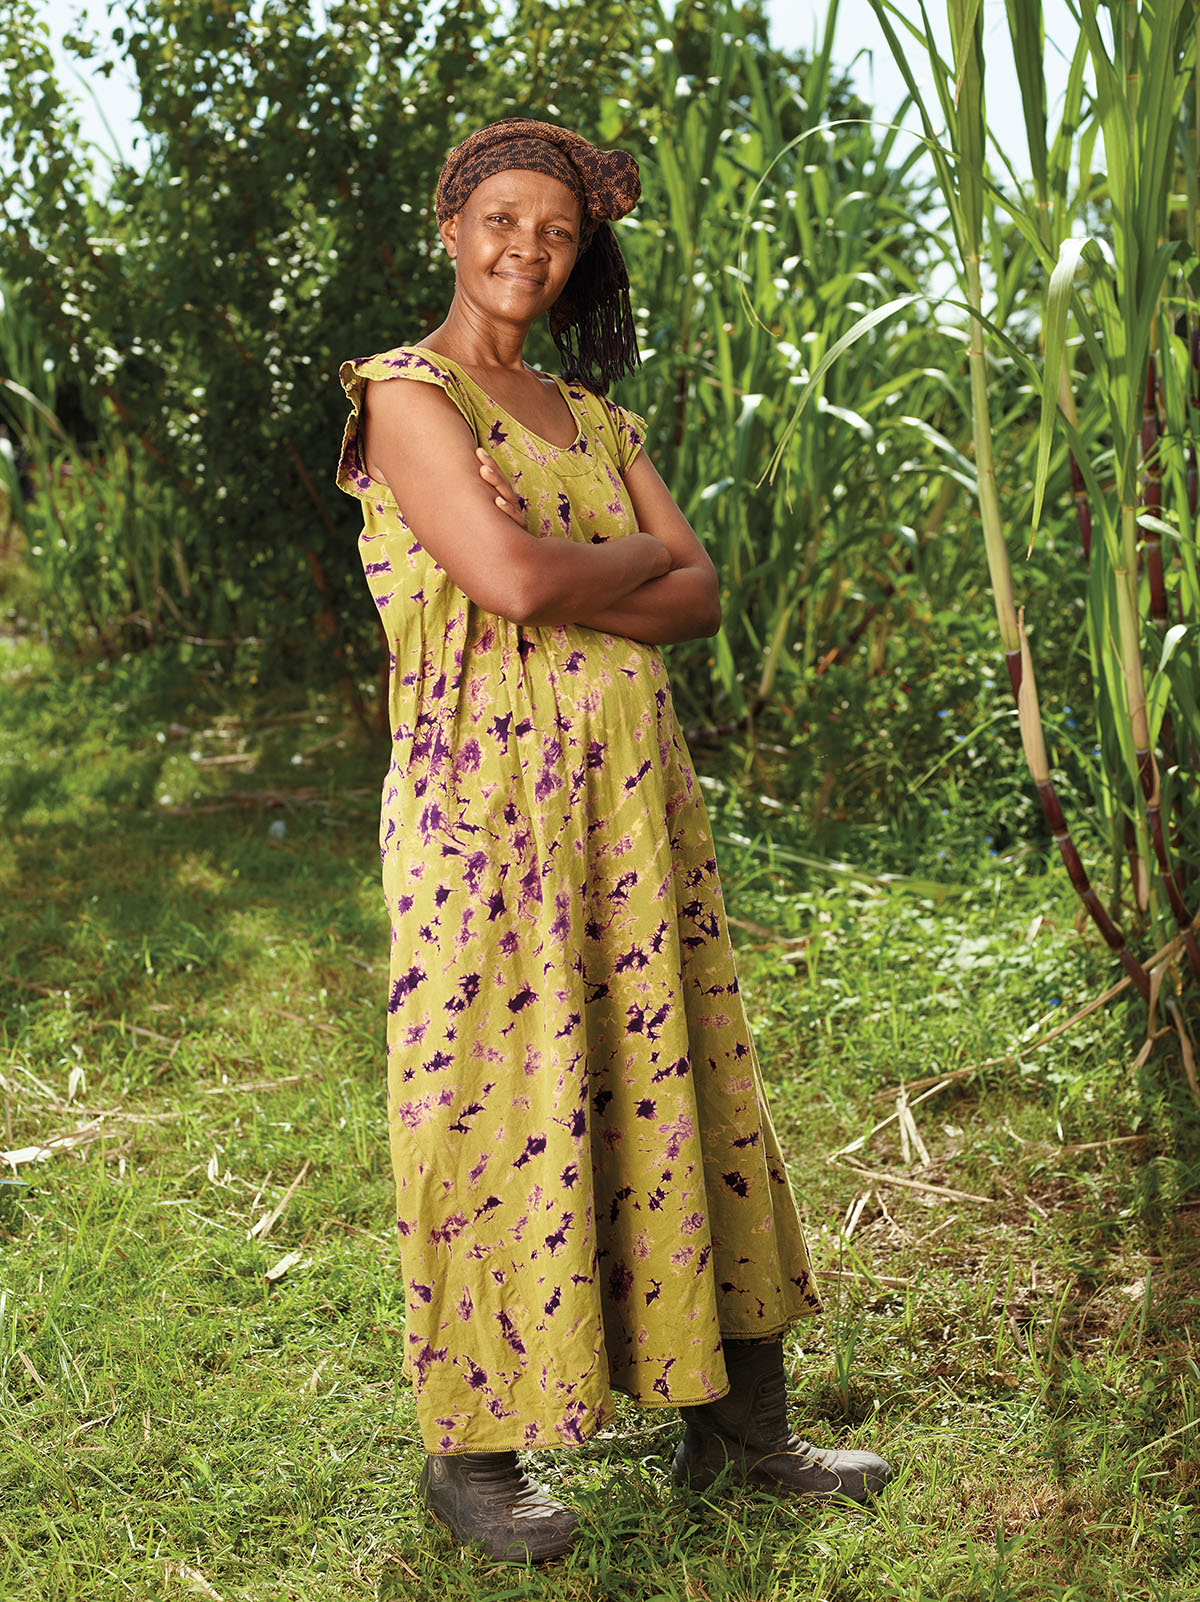 A woman in a yellow patterned dress stands with her hands folded in a green field